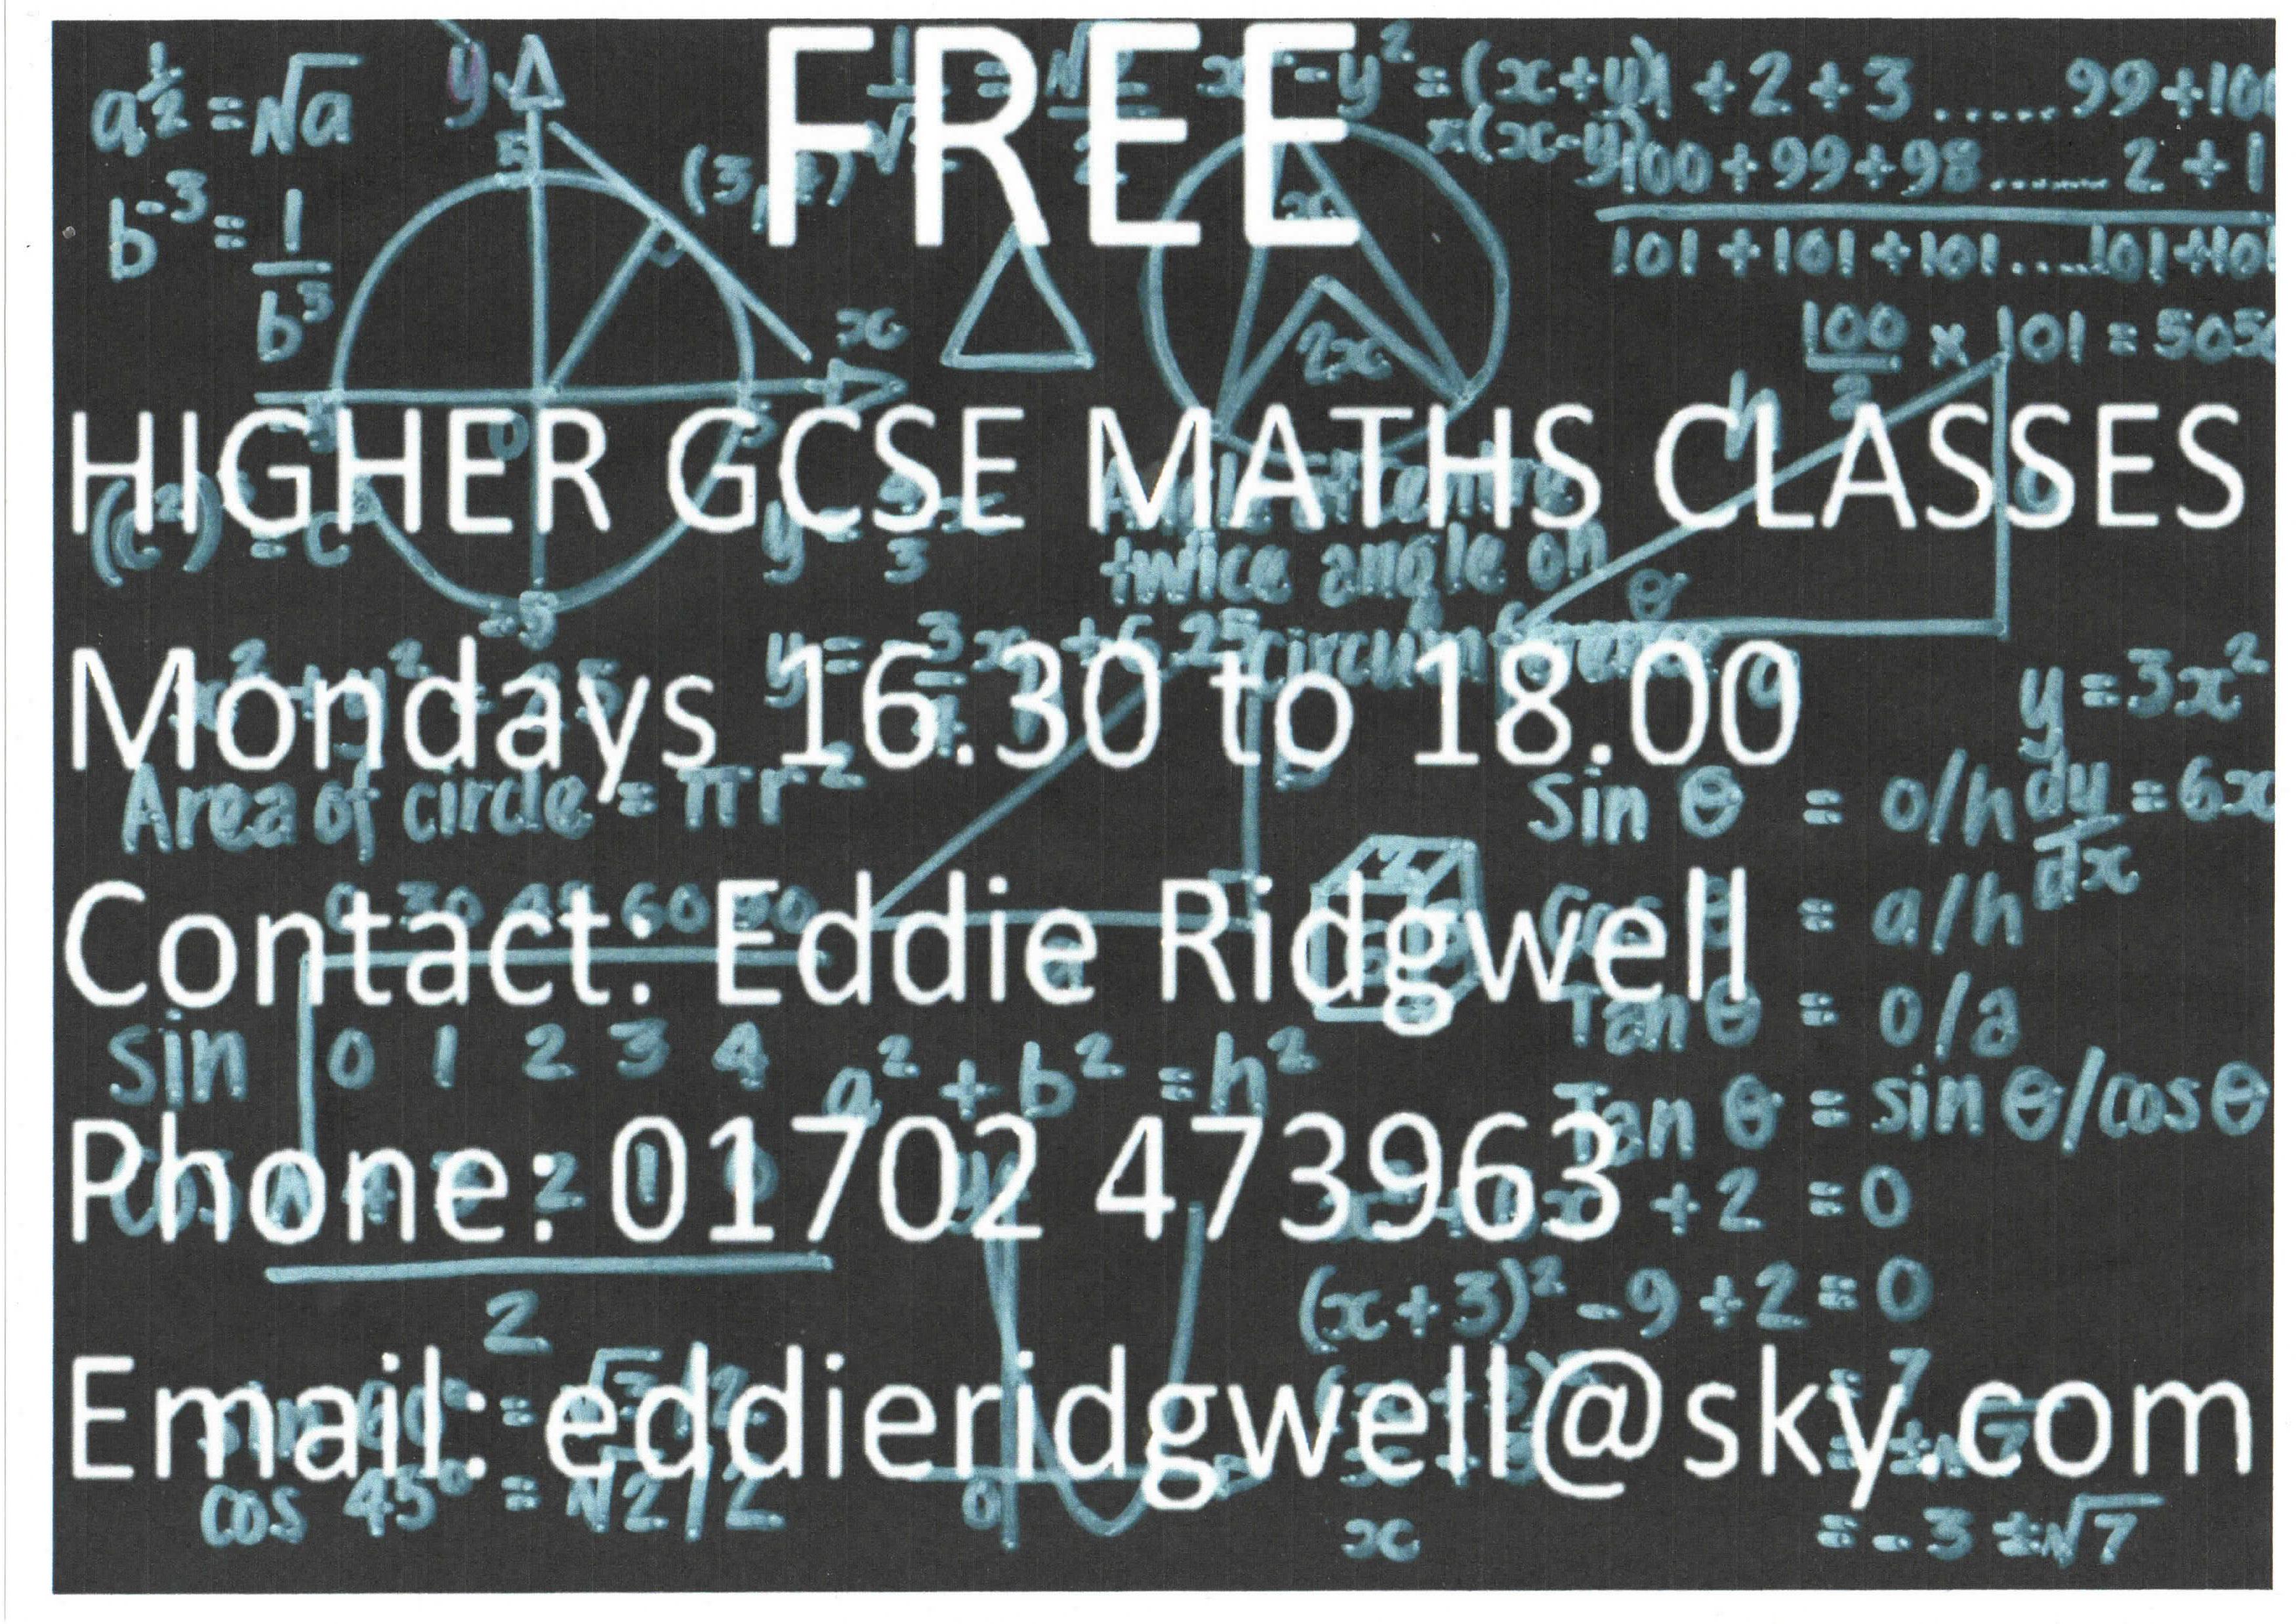 Mathematics higher GCSE classes for year 11 students